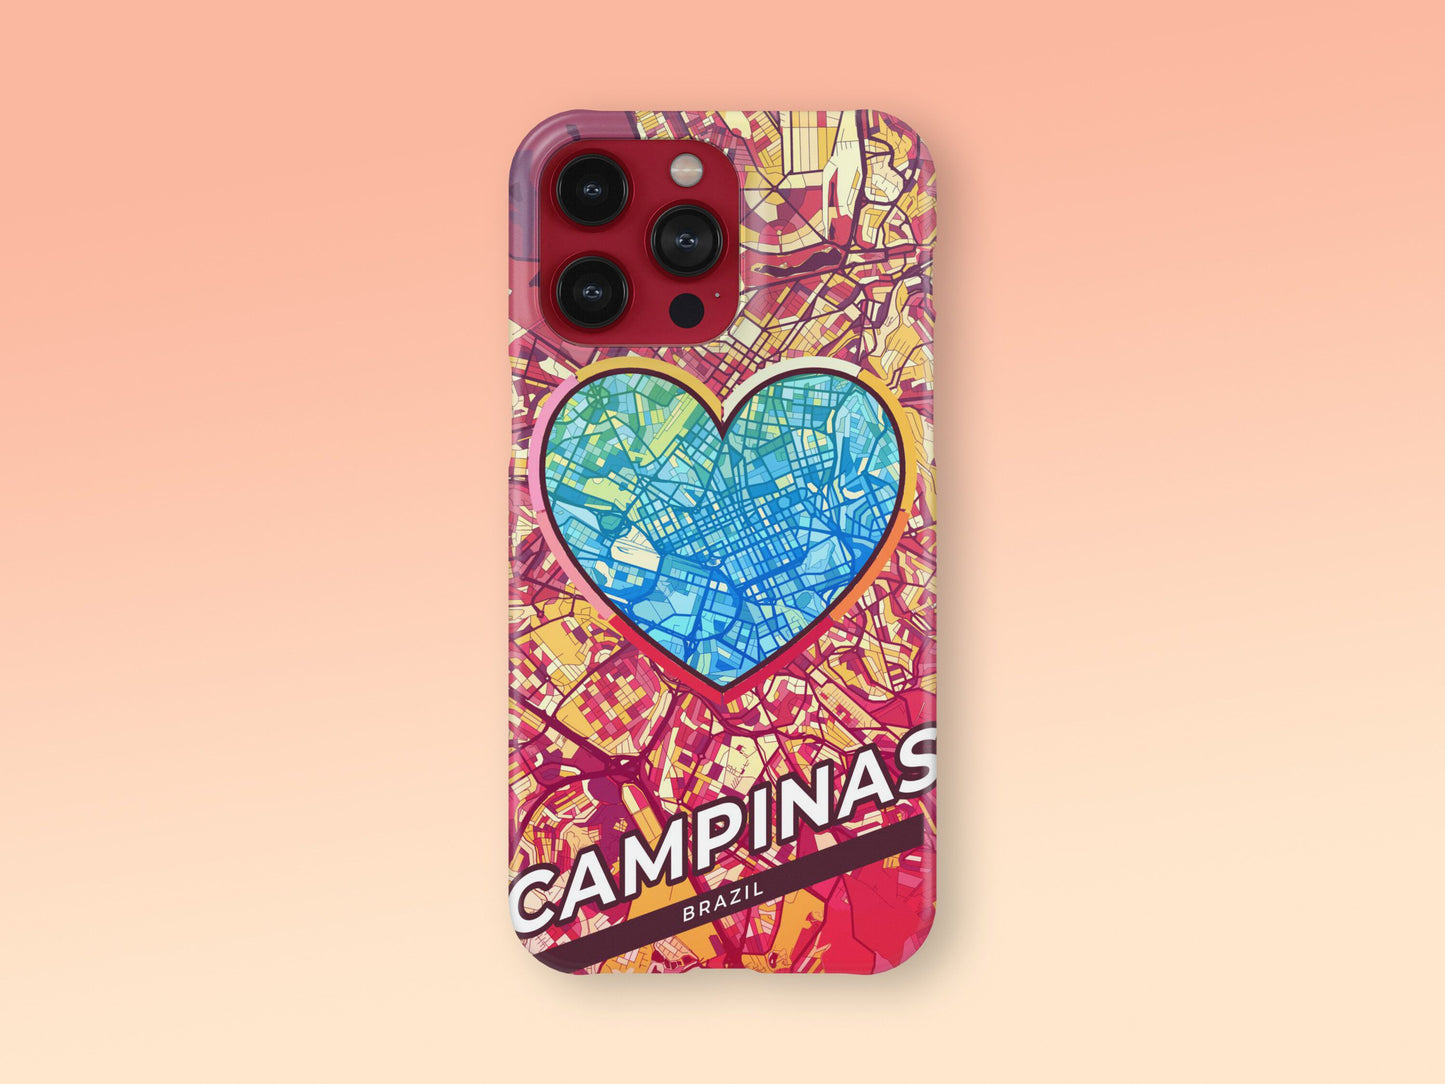 Campinas Brazil slim phone case with colorful icon. Birthday, wedding or housewarming gift. Couple match cases. 2